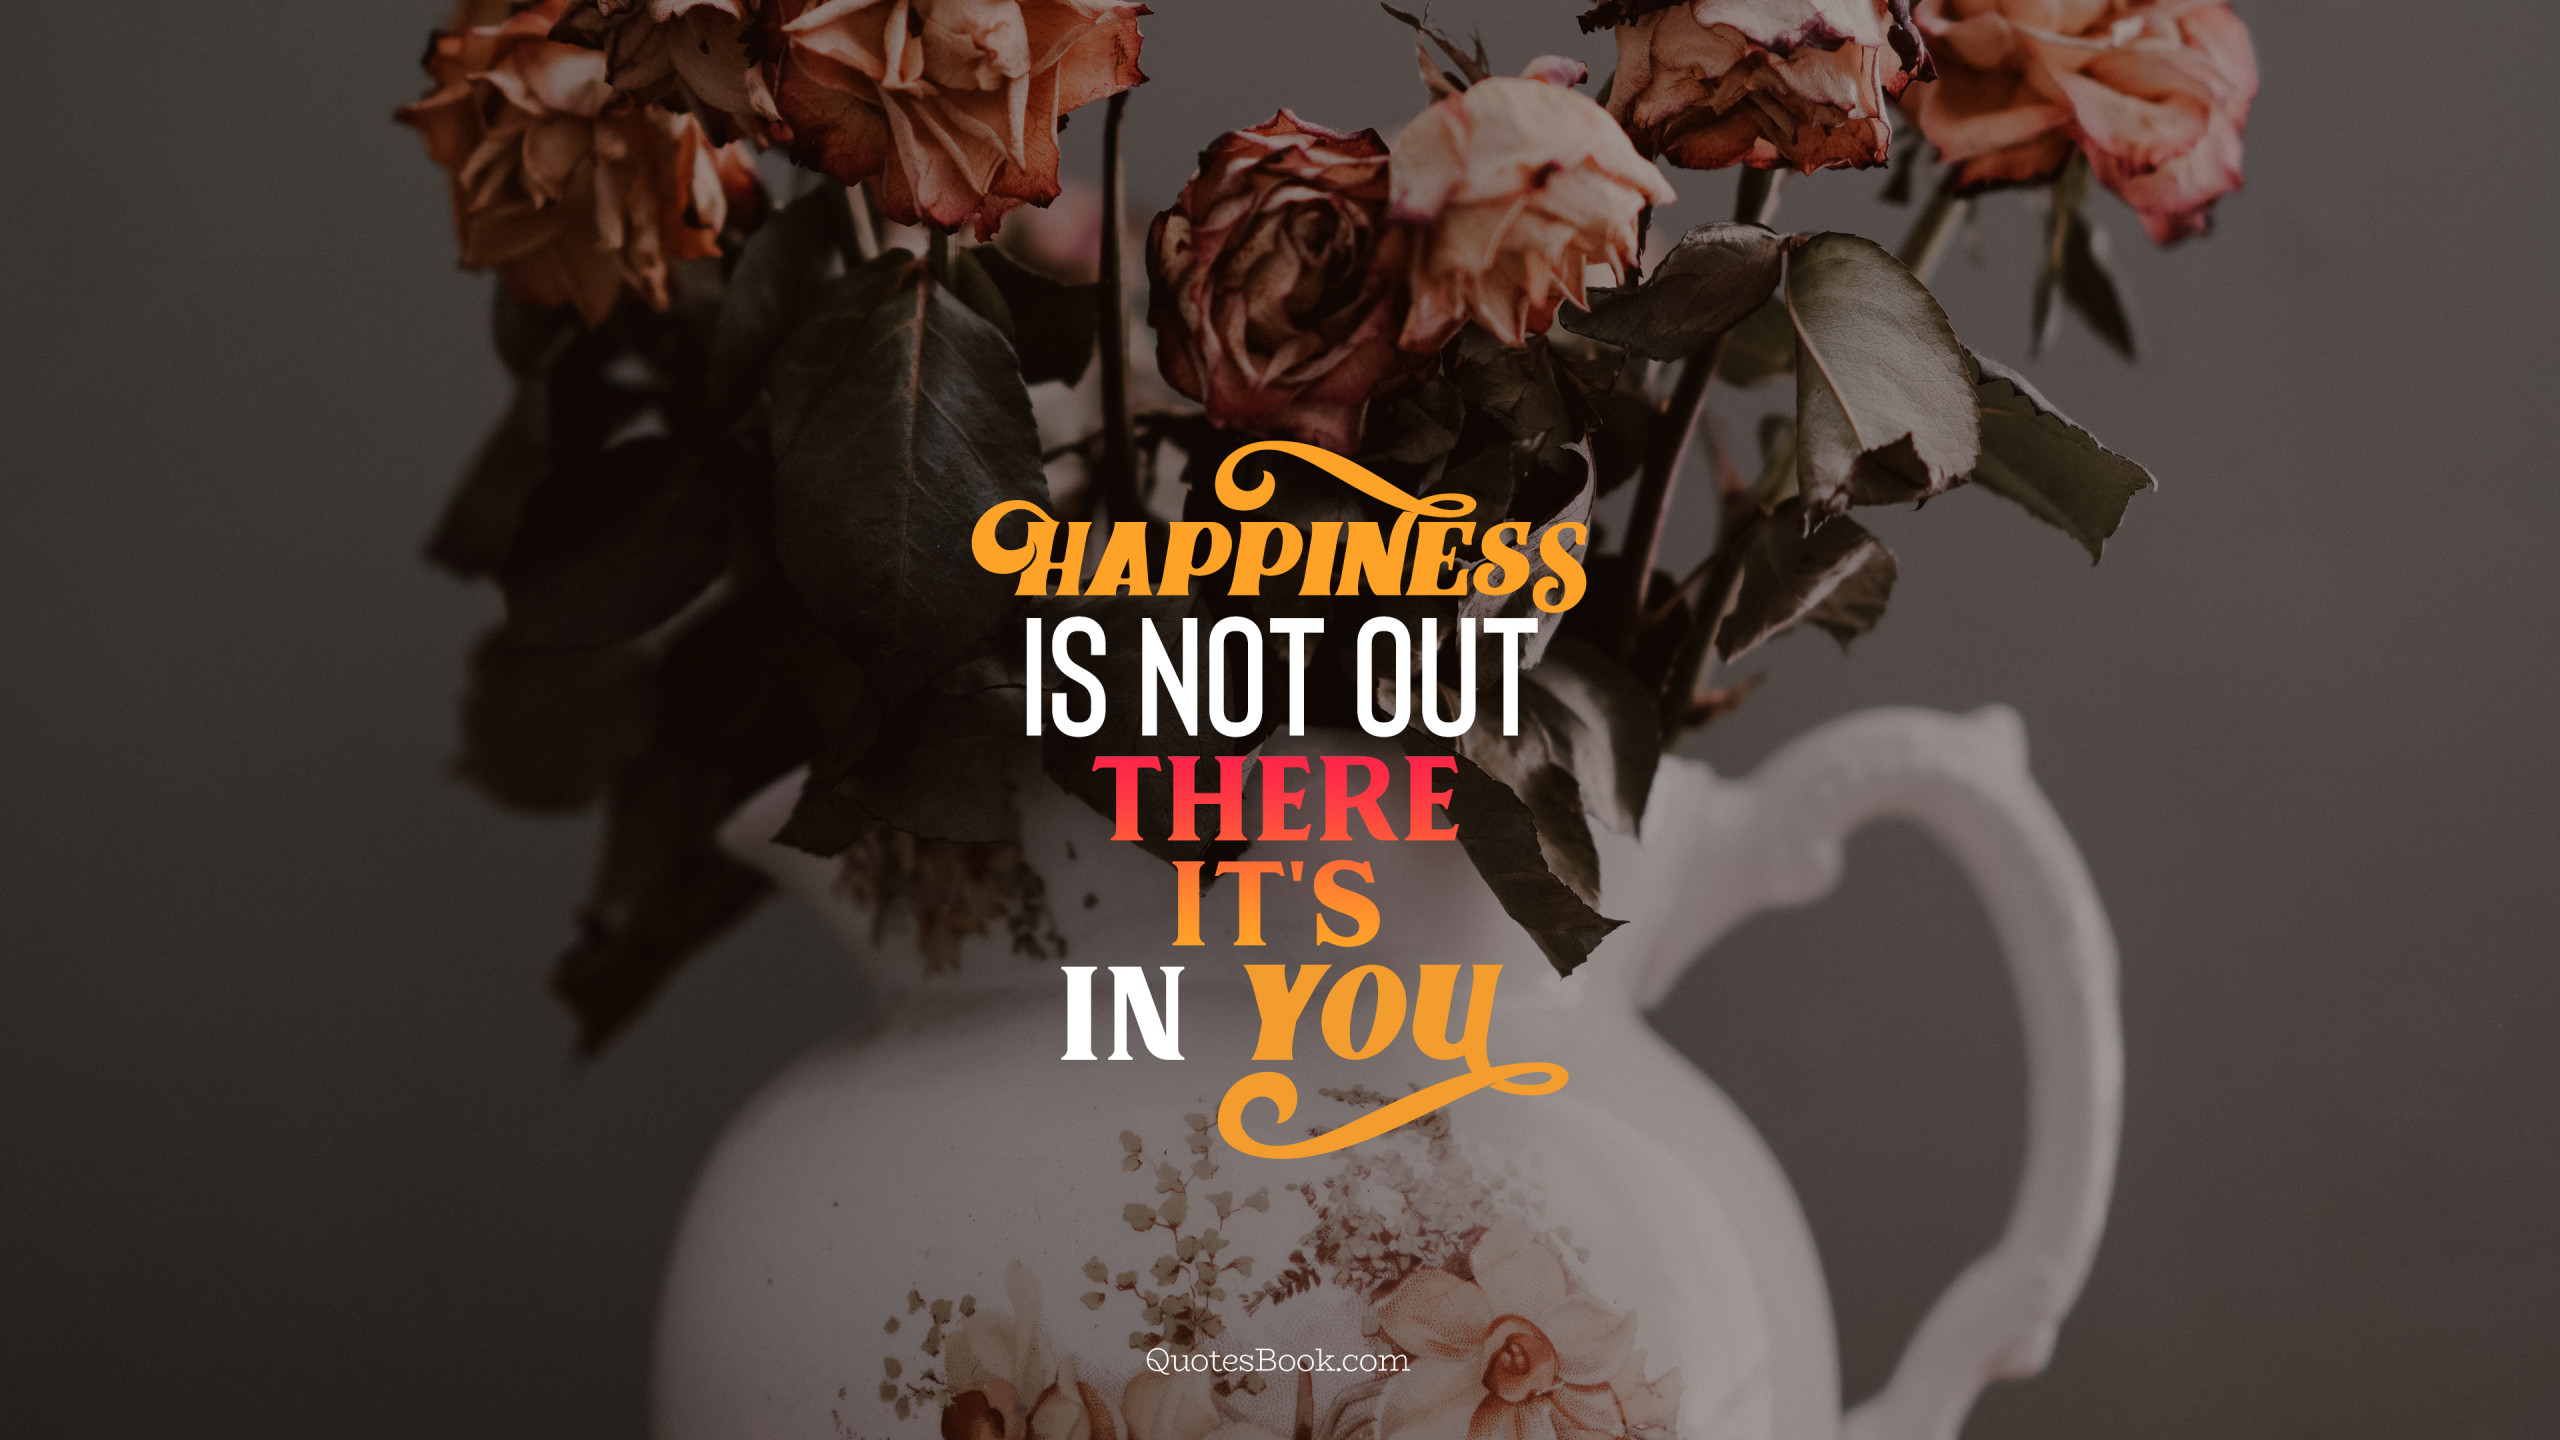 Happiness is not out there it's in you - QuotesBook